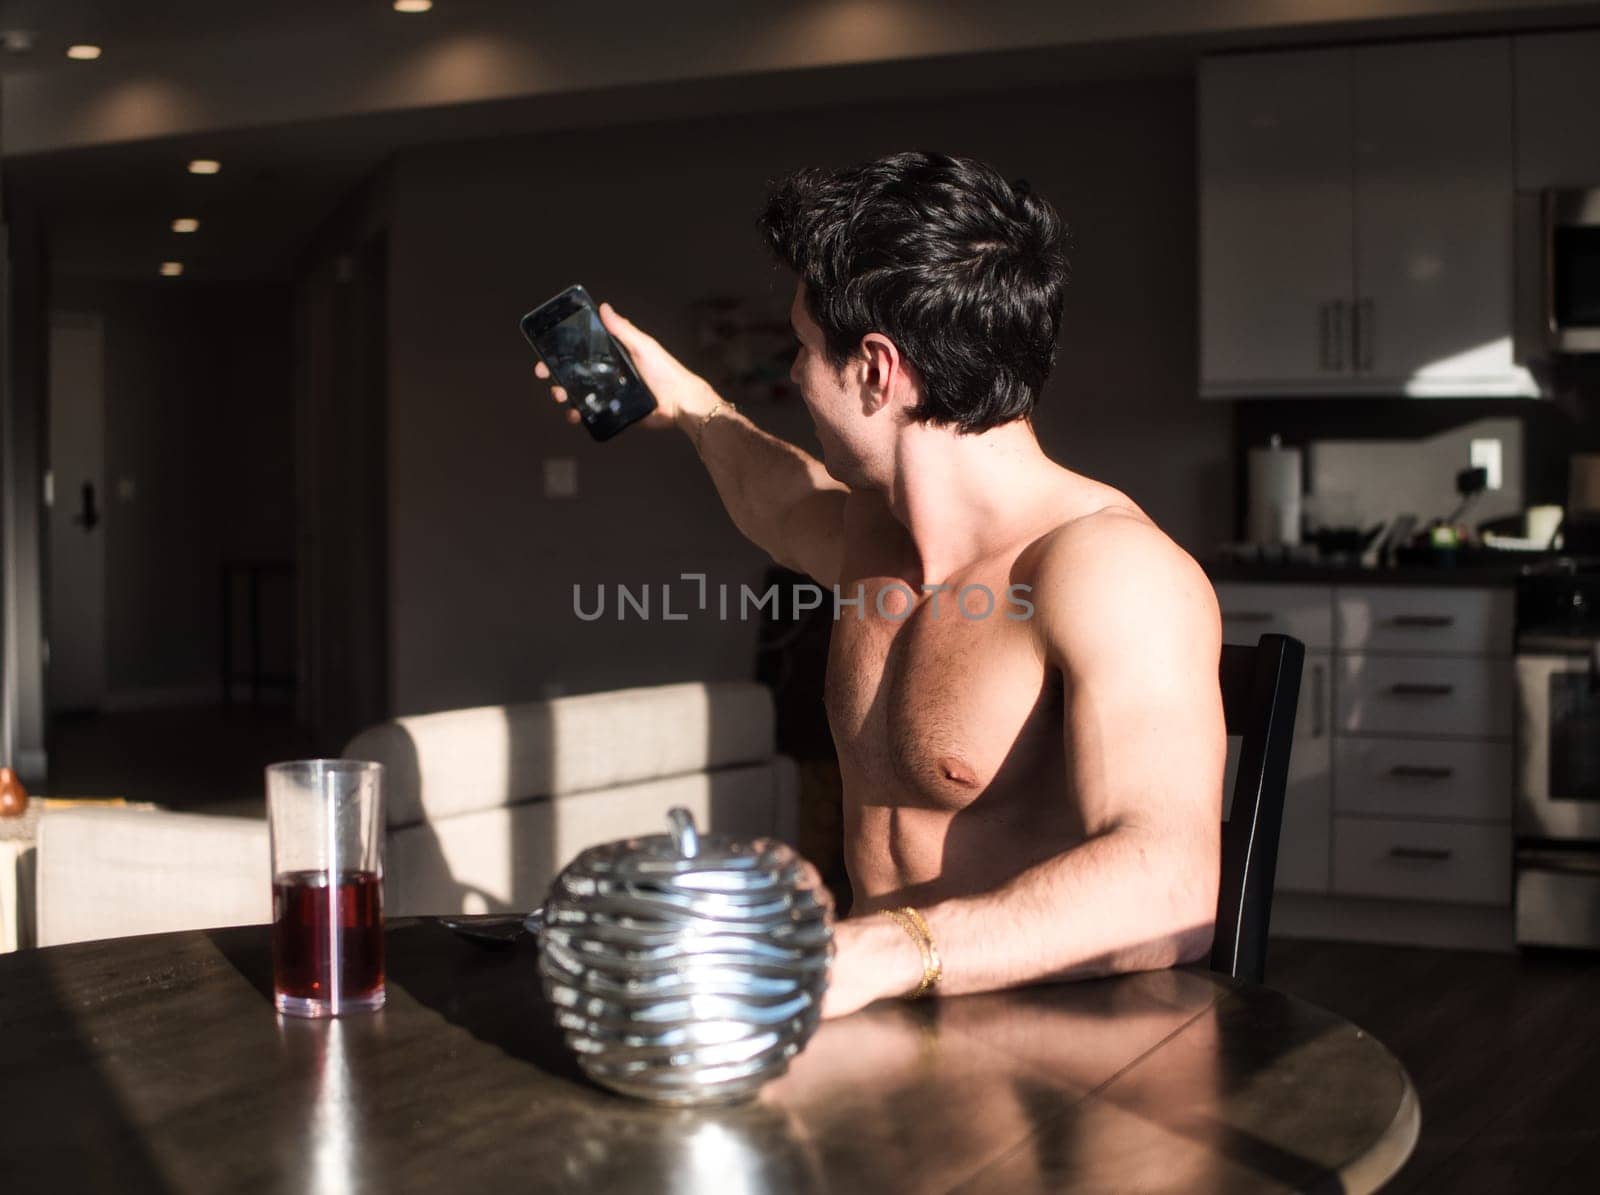 A young muscular shirtless man sitting at a table taking a picture of himself. Photo of a man capturing a self-portrait at a table in the morning light